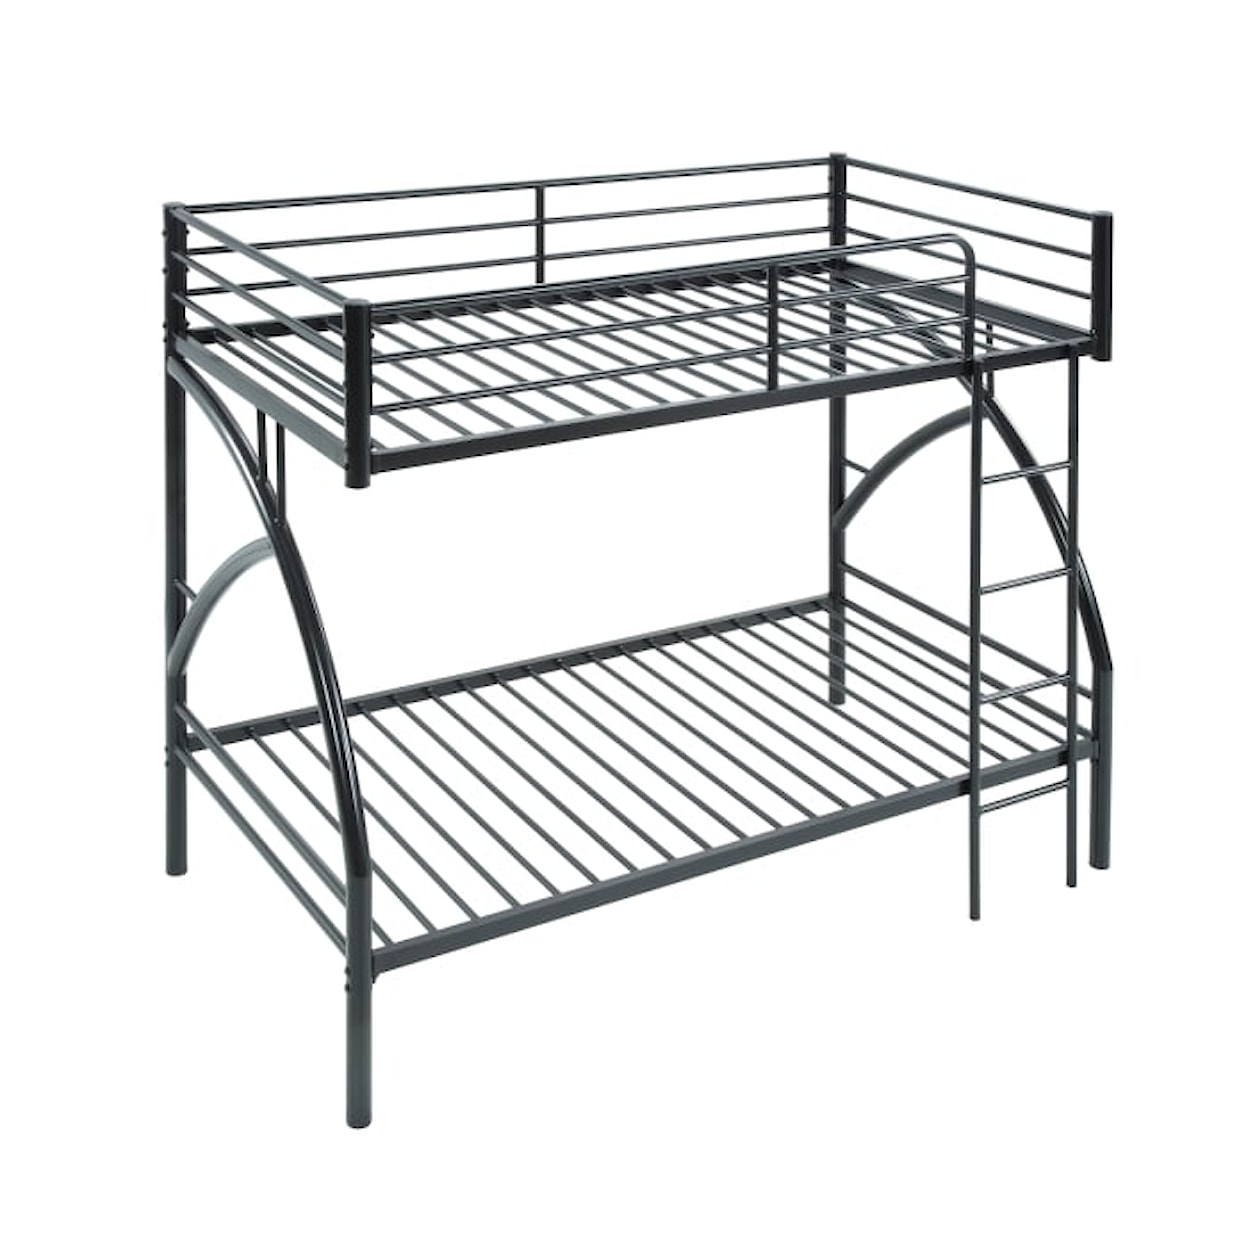 Homelegance Furniture Miscellaneous Twin/Twin Bunk Bed